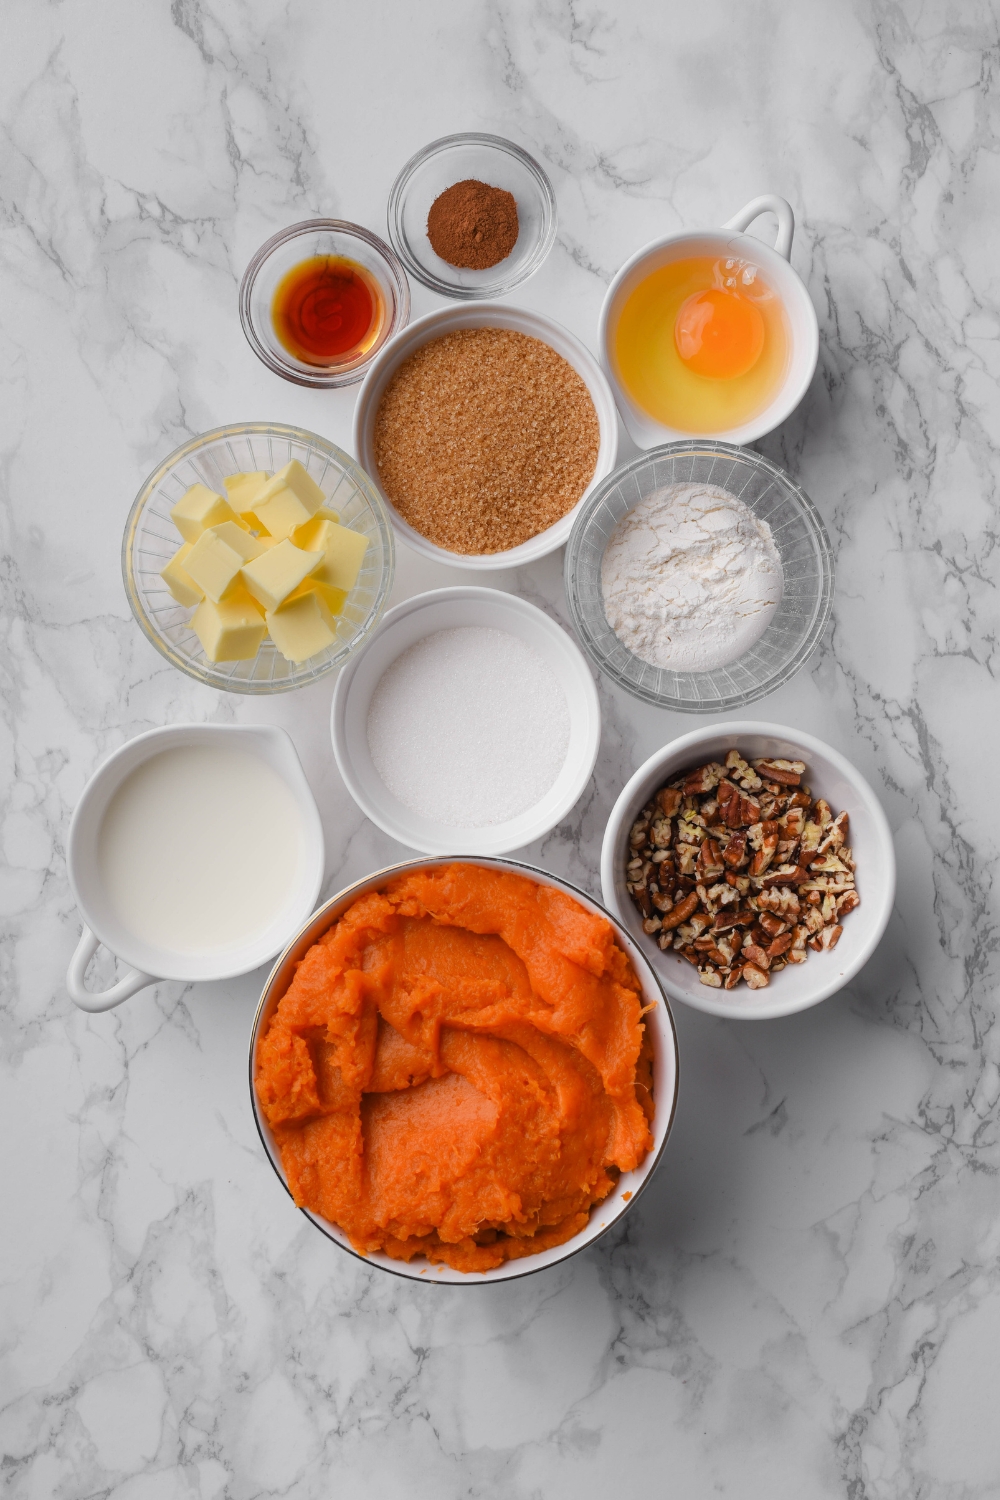 An assortment of ingredients including bowls of sweet potato puree, chopped pecans, brown sugar, vanilla extract, milk, sugar, butter cubes, an egg, and spices.